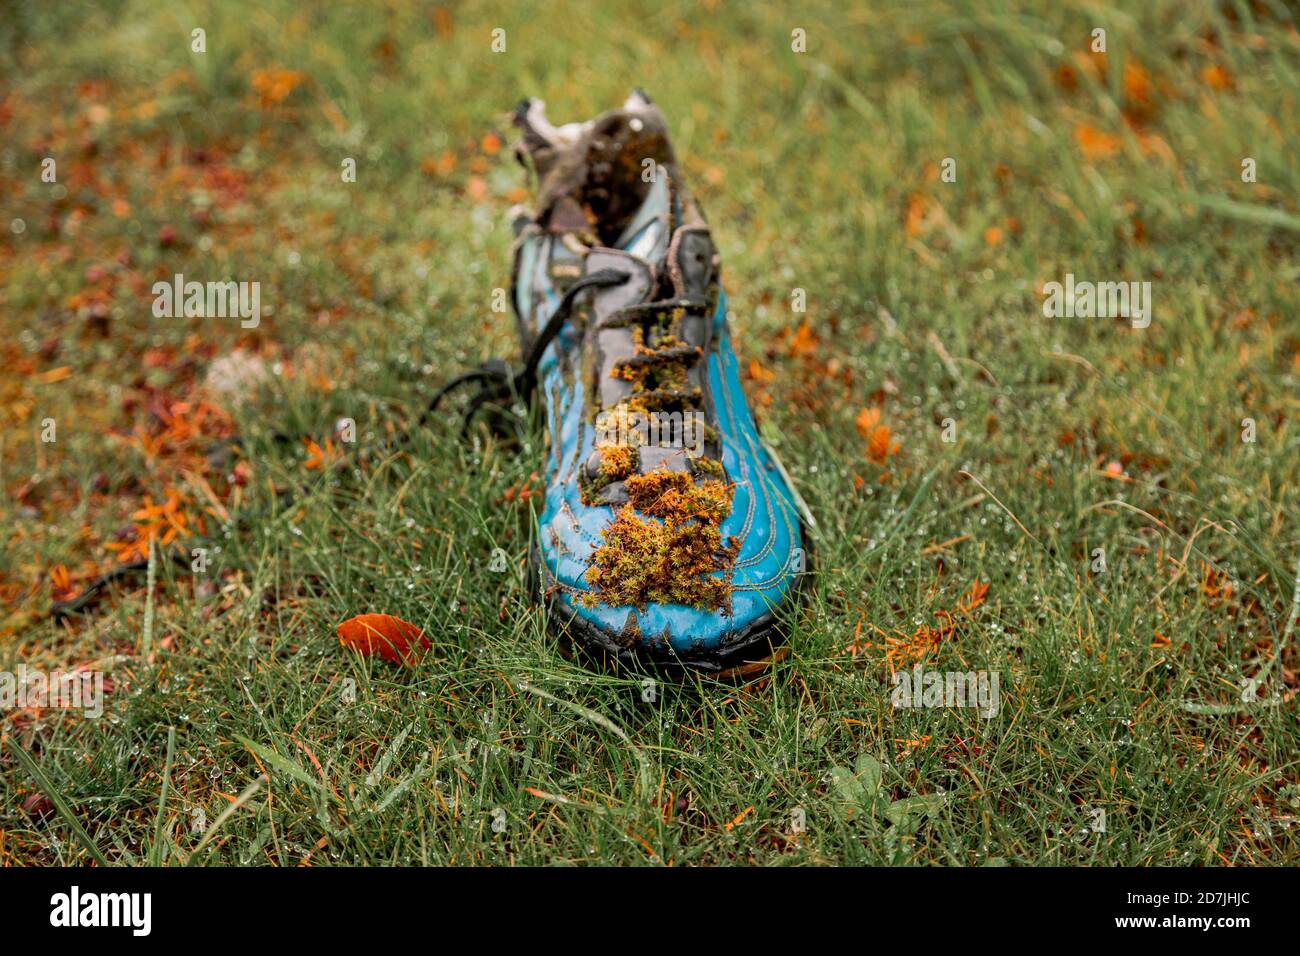 Old shoe deteriorating in grass Stock Photo